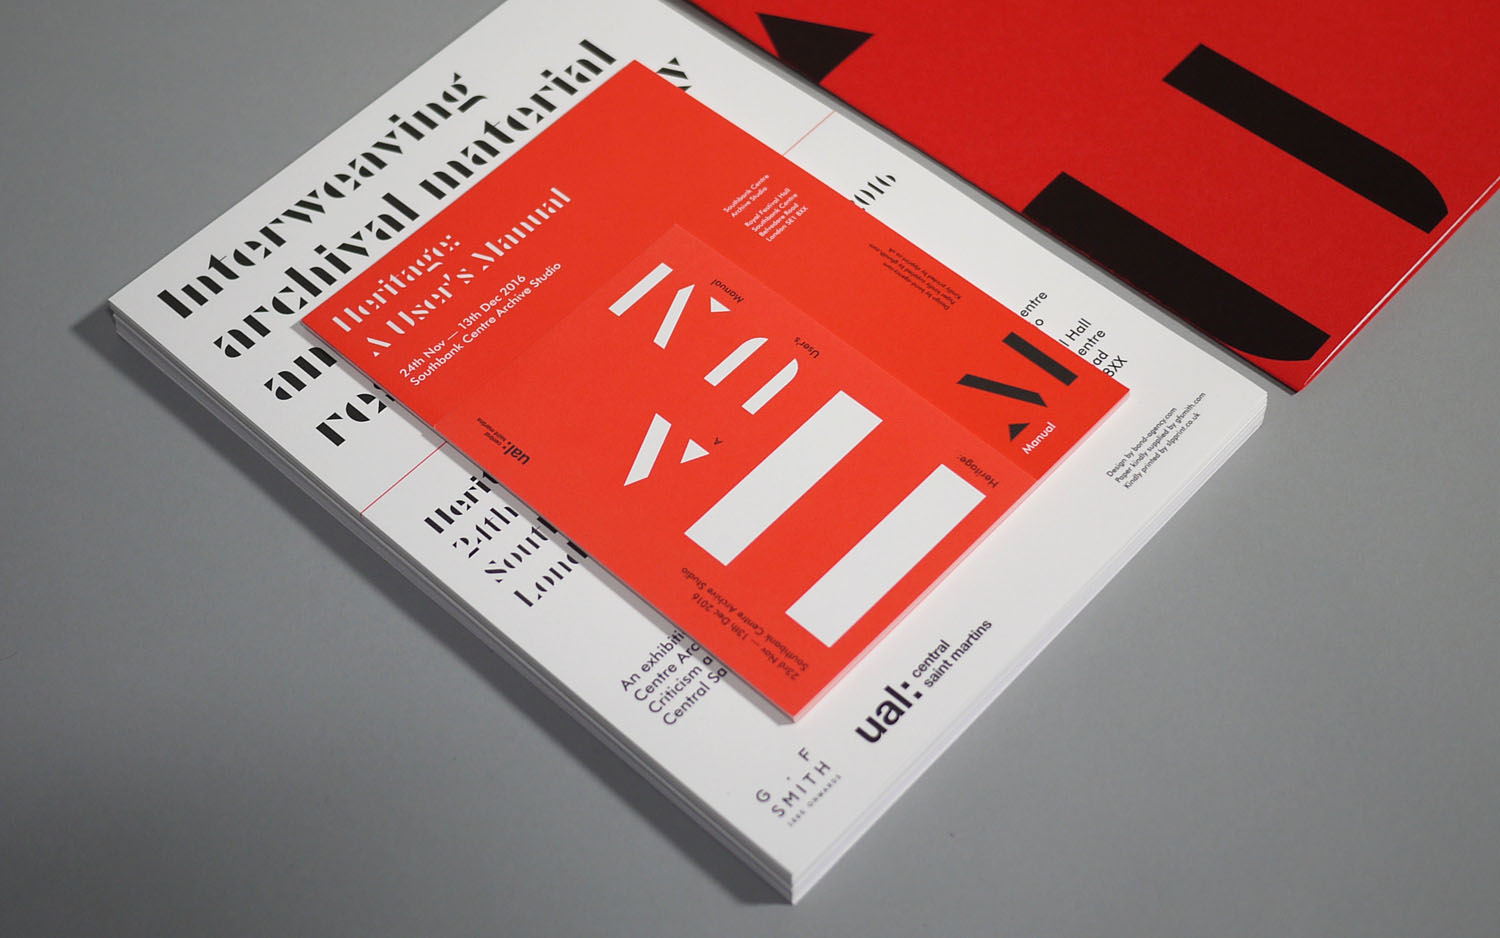 Brand identity and print communication by Bond for Heritage: A User's Manual, an exhibition in London's Southbank Centre